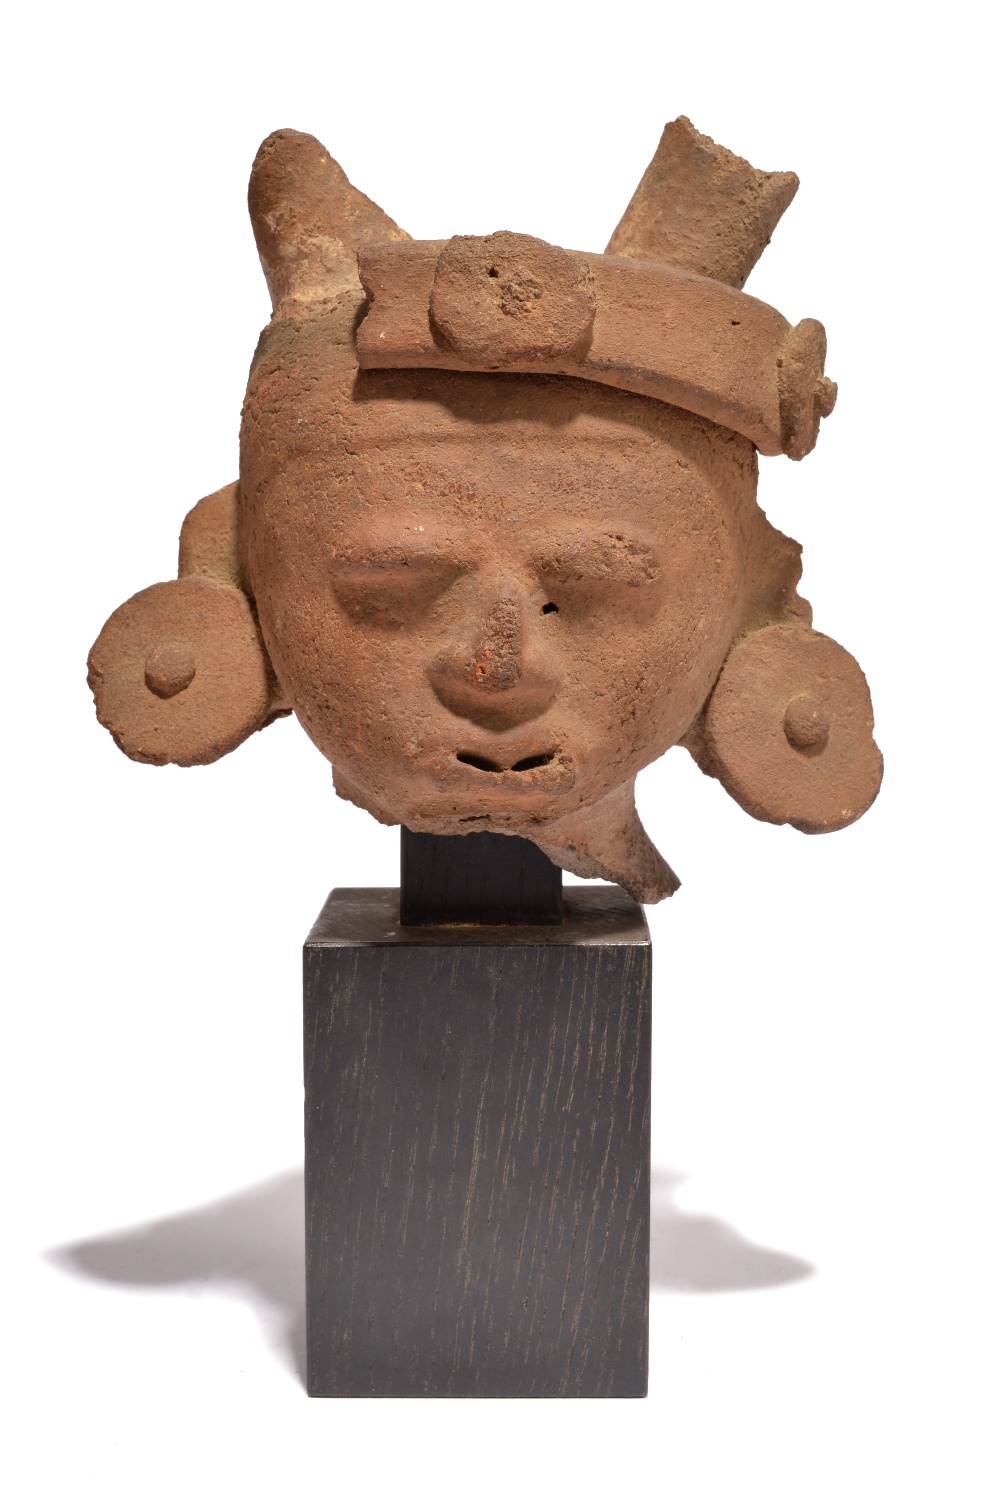 A Veracruz head Mexico, circa 500 - 700 AD earthenware, with the remains of a headband and with